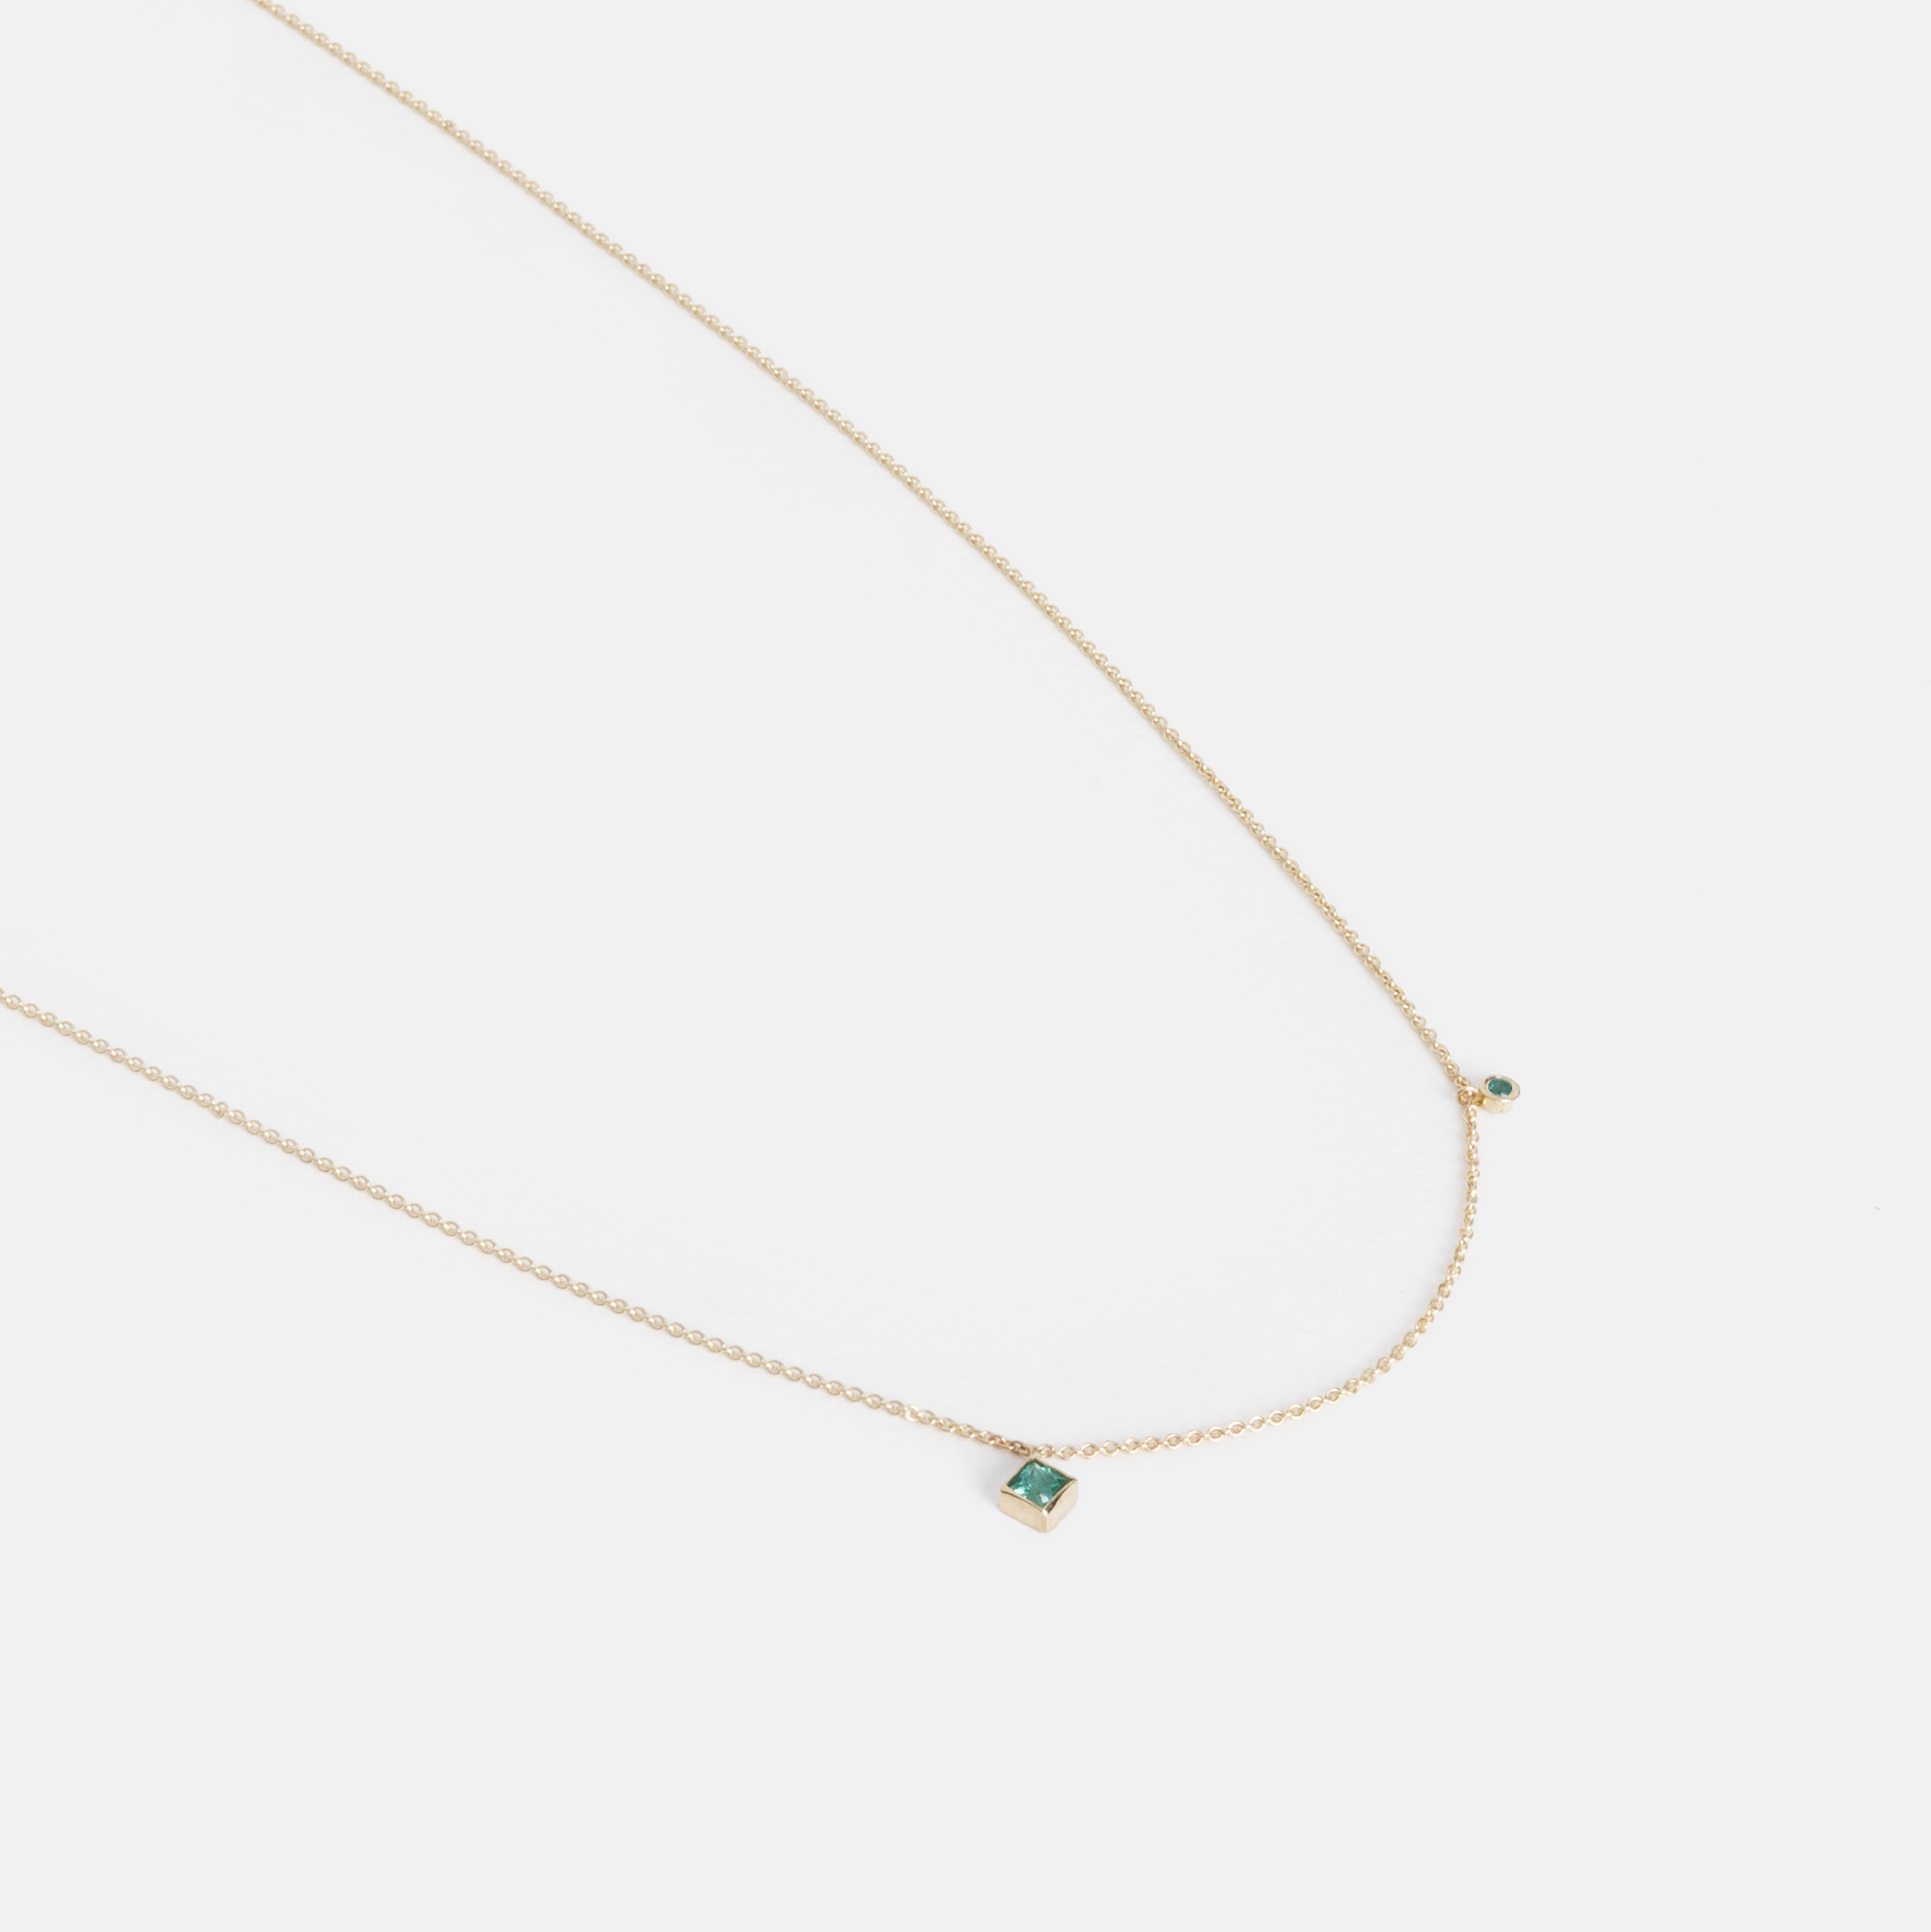 Ibi Delicate Necklace in 14k Gold set with Emeralds By SHW Fine Jewelry NYC